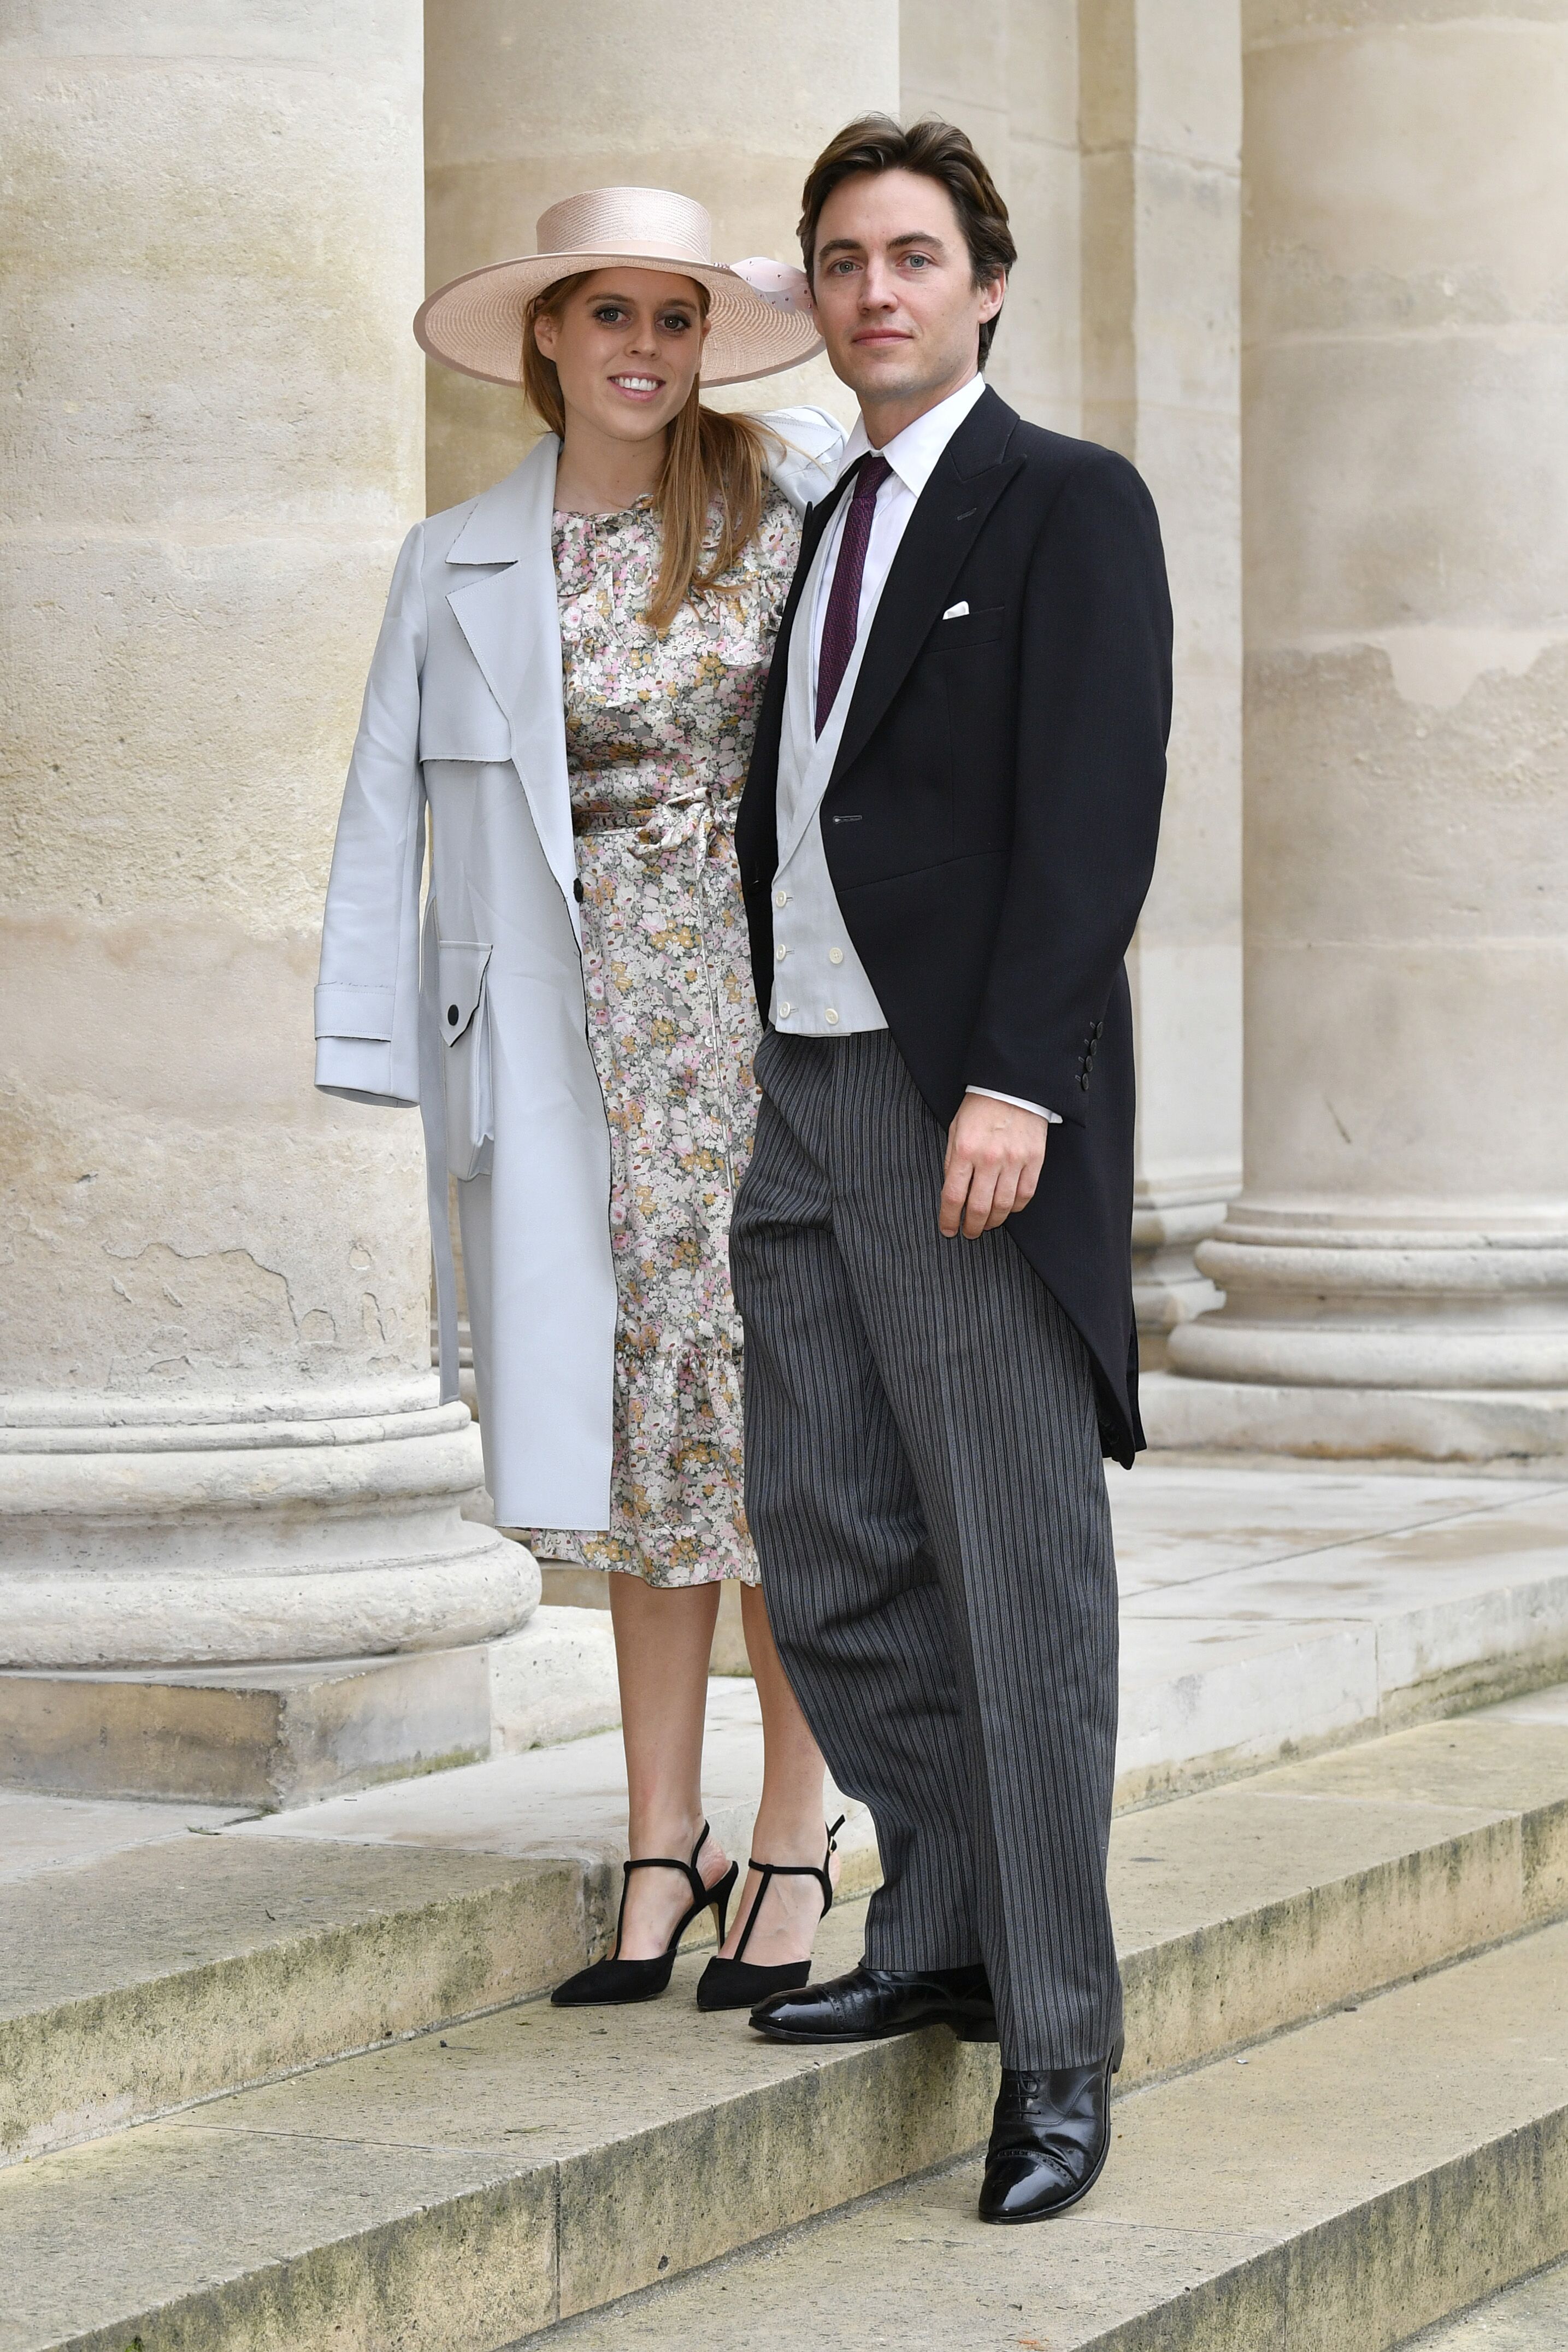 Princess Beatrice d’York and her fiance Edoardo Mapelli Mozzi attend the Wedding of Prince Jean-Christophe Napoleon and Olympia Von Arco-Zinneberg at Les Invalides. | Photo: Getty Images